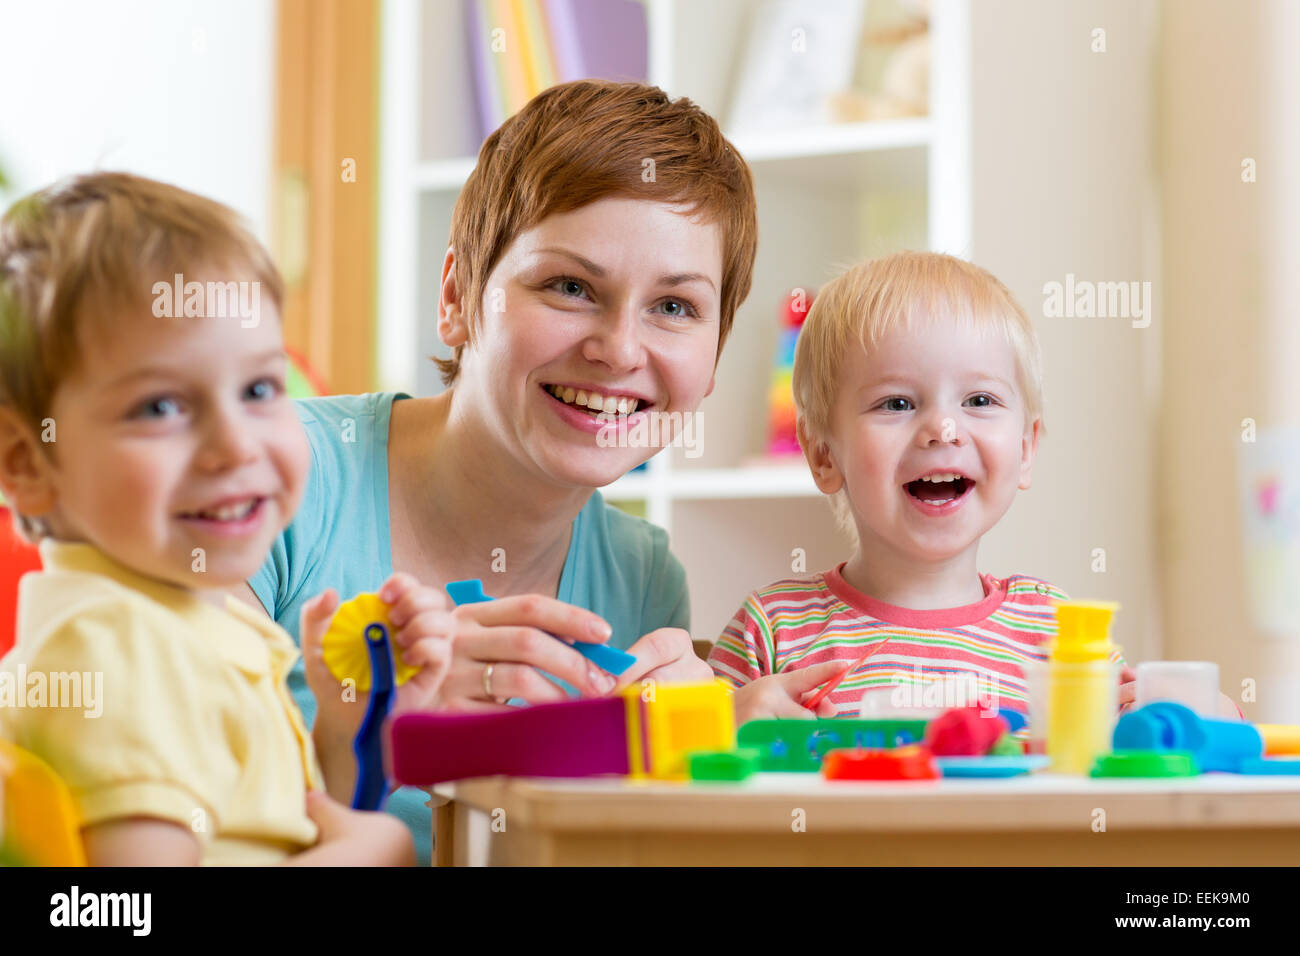 woman playing and teaching children Stock Photo